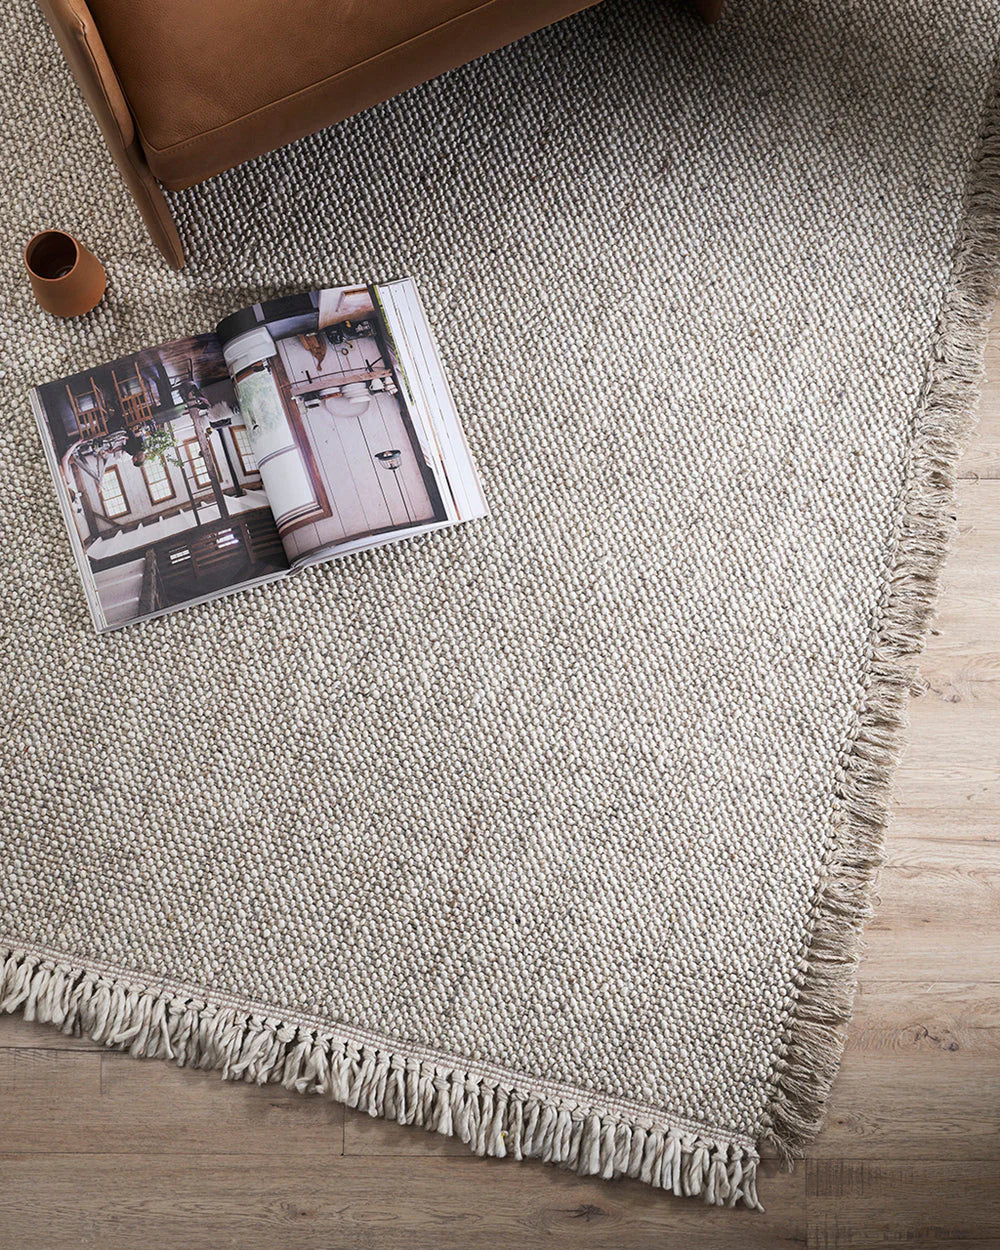 Ulster White Natural Rug from Baya Furtex Stockist Make Your House A Home, Furniture Store Bendigo. Free Australia Wide Delivery. Mulberi Rugs.